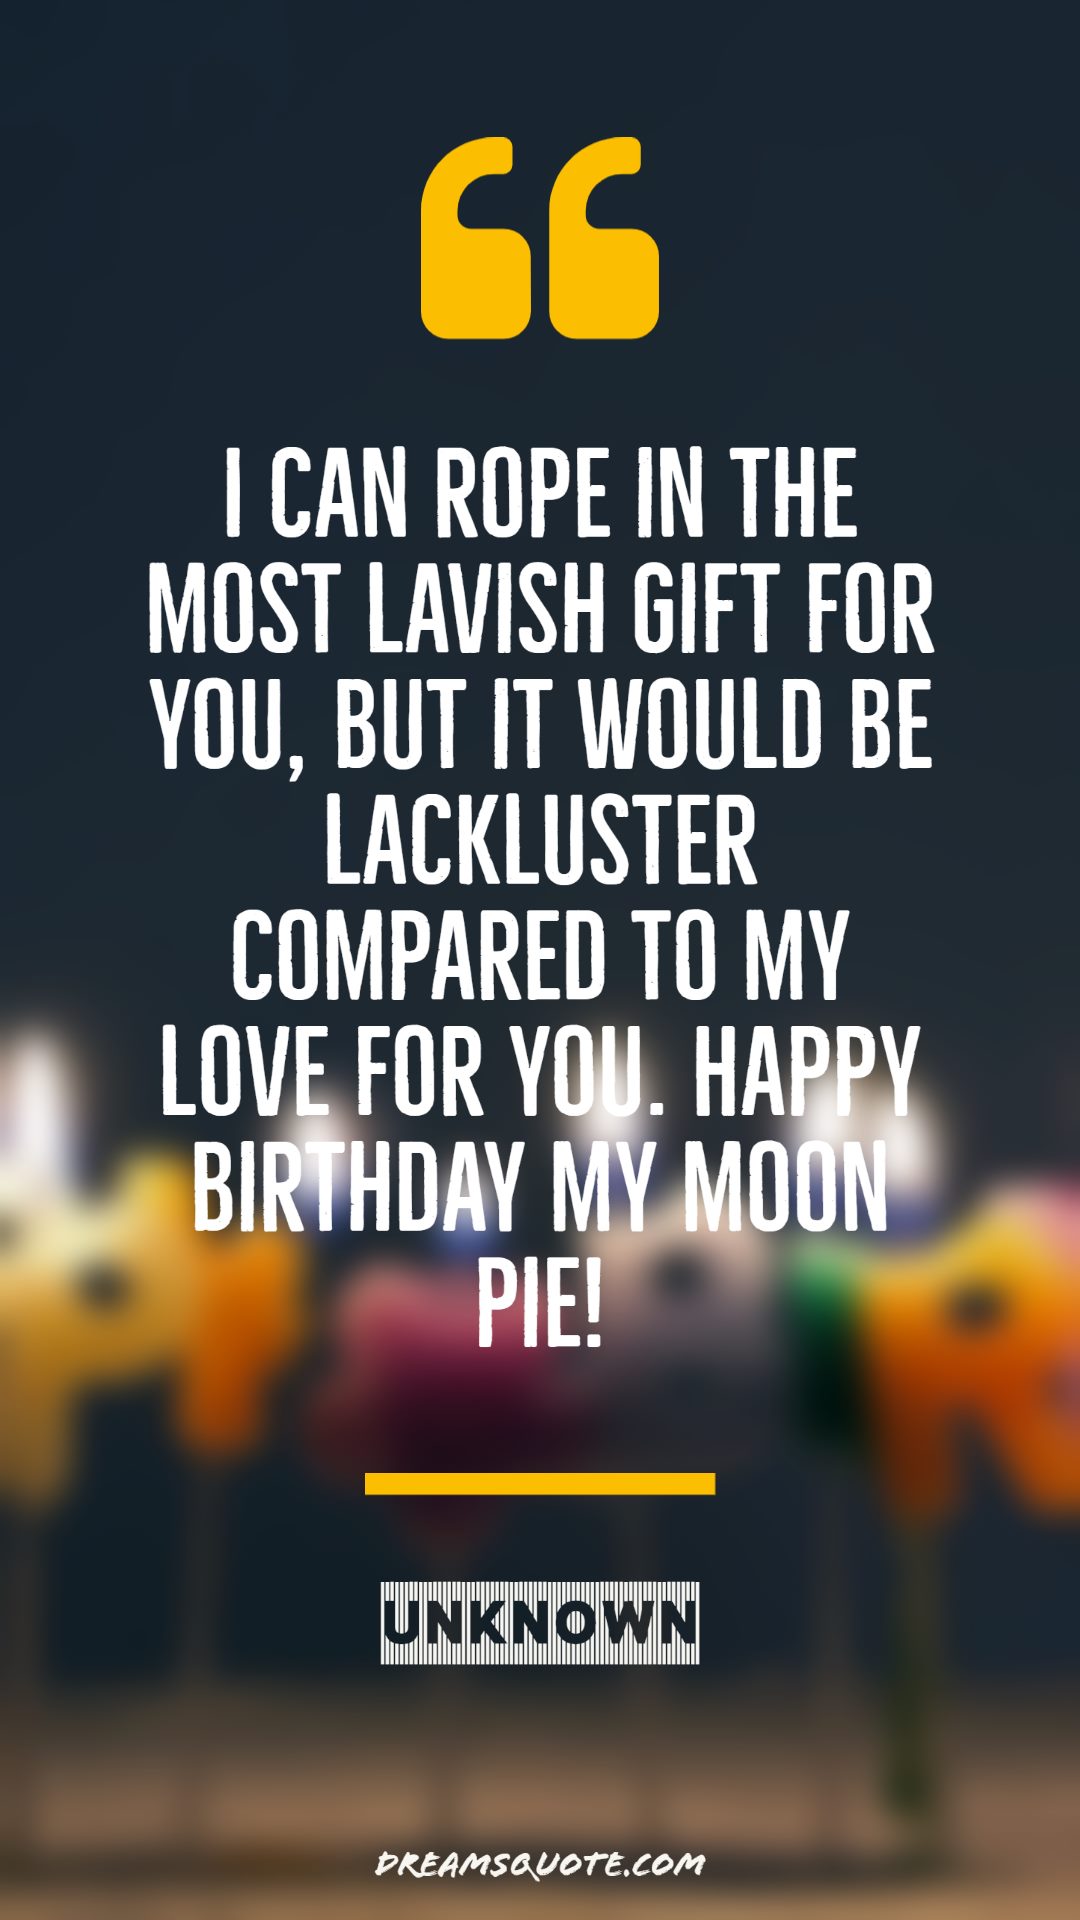 best birthday wishes messages and quotes for loved ones and family